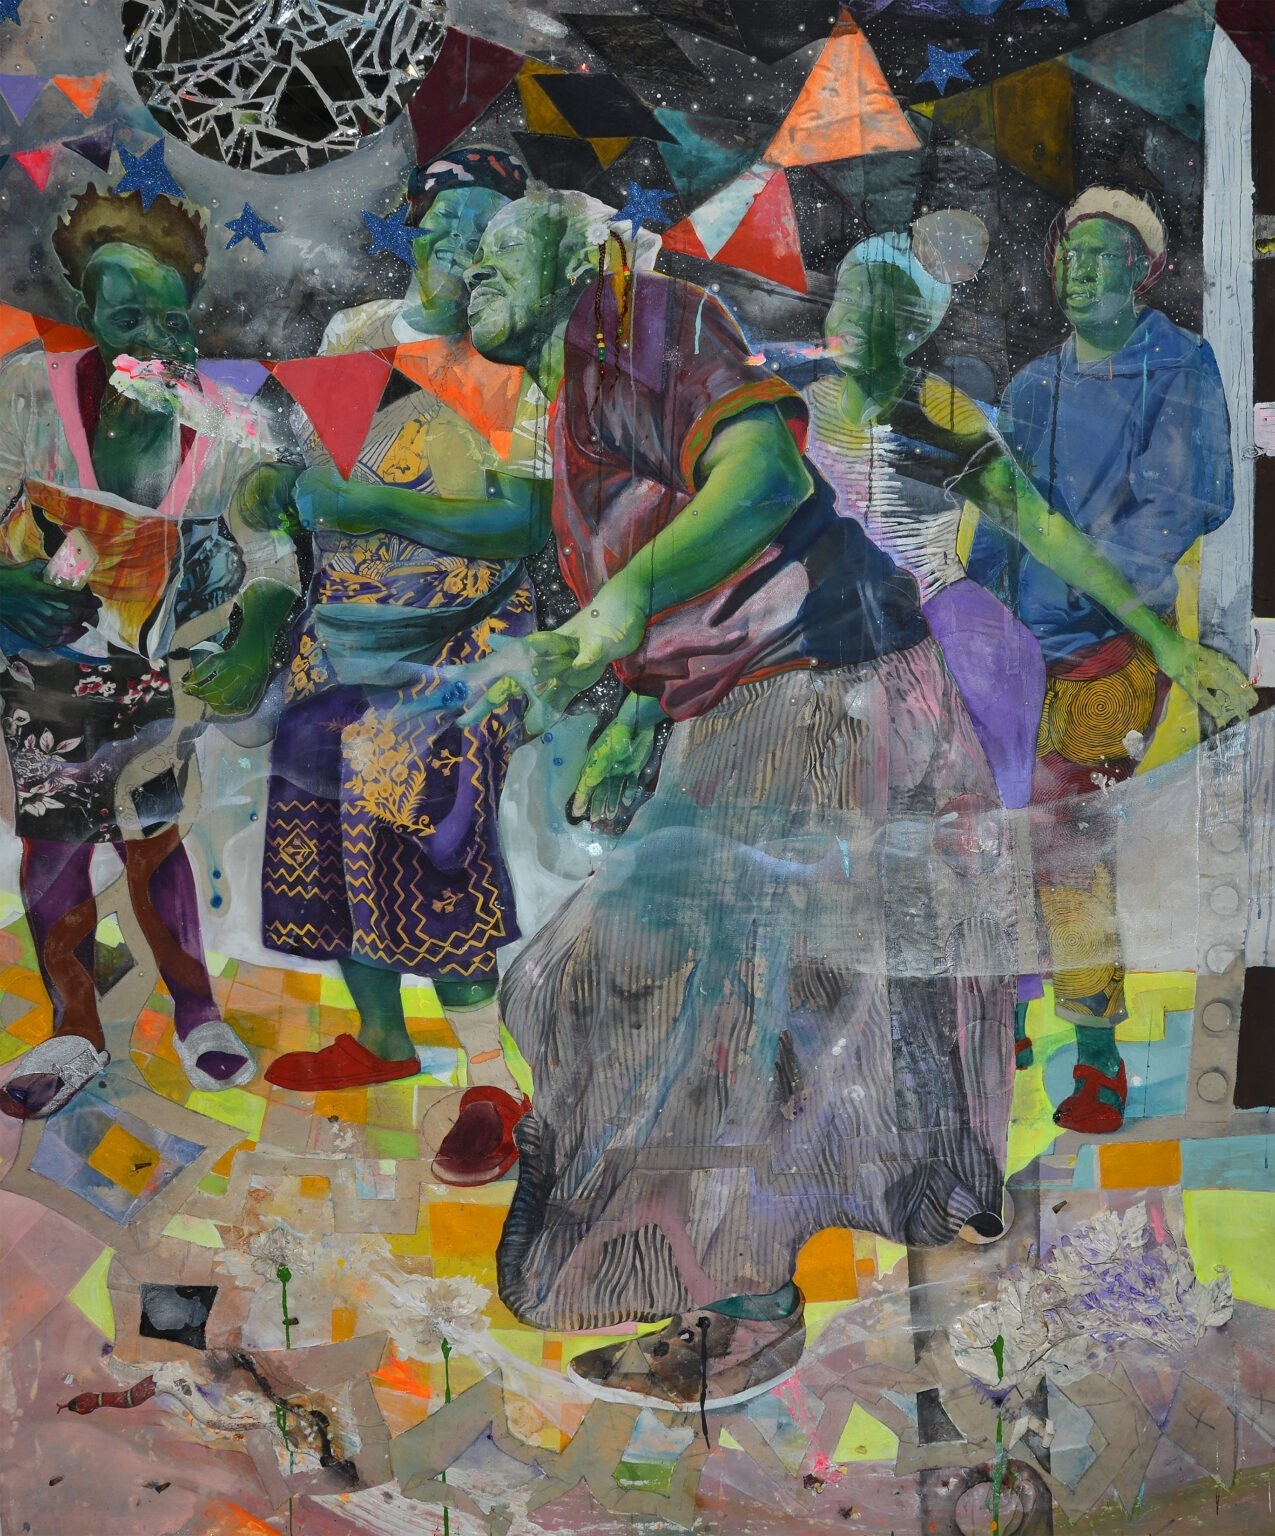 a colorful mixed media painting of people dancing, one man is in the foreground with 4 people behind him